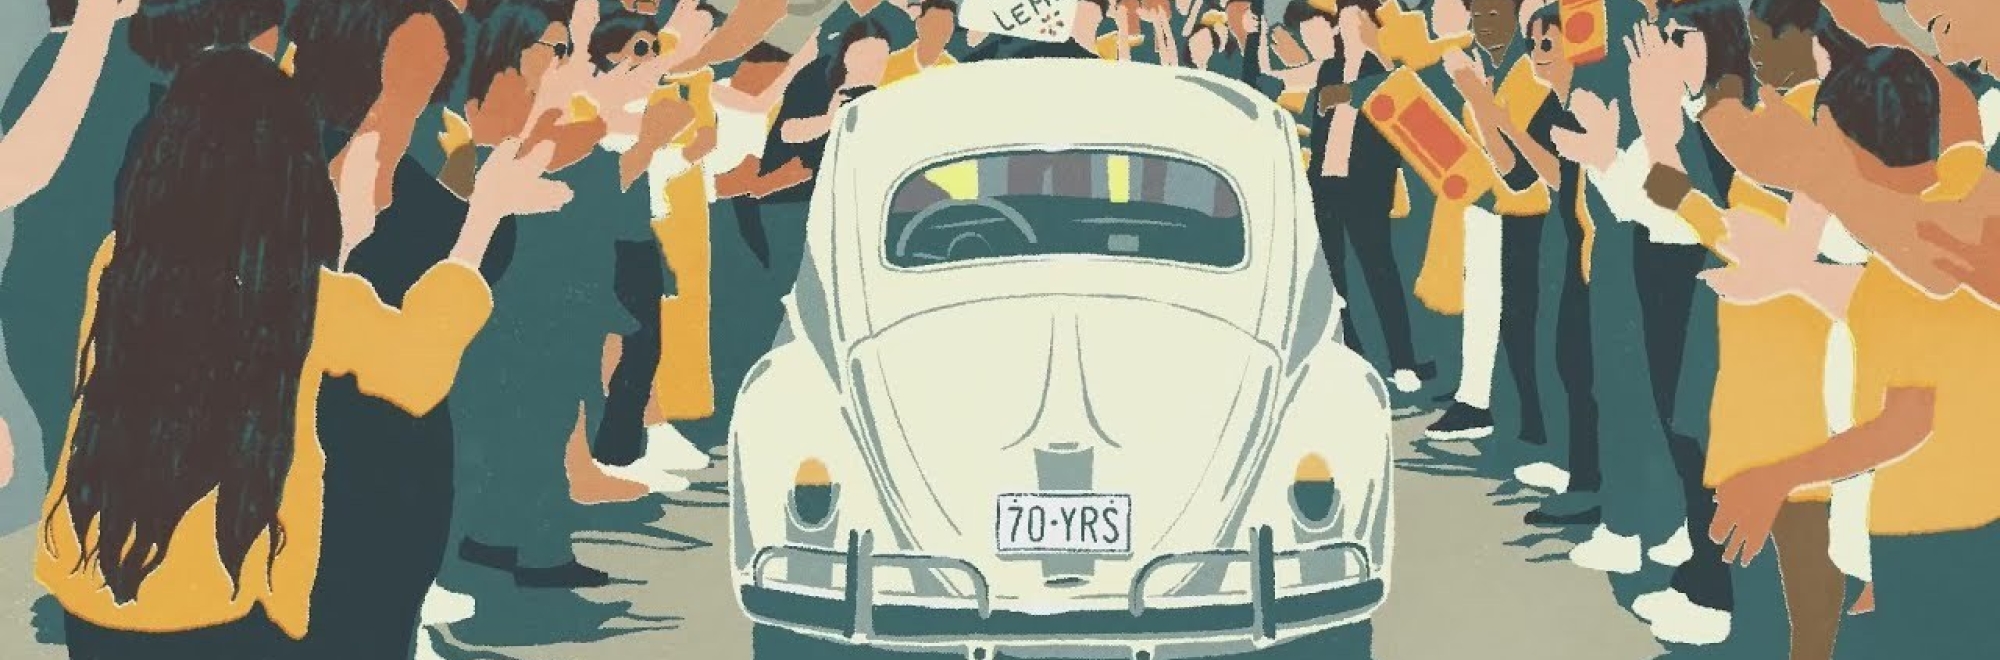 The beloved Beetle receives a well deserved send-off in The Last Mile from Volkswagen